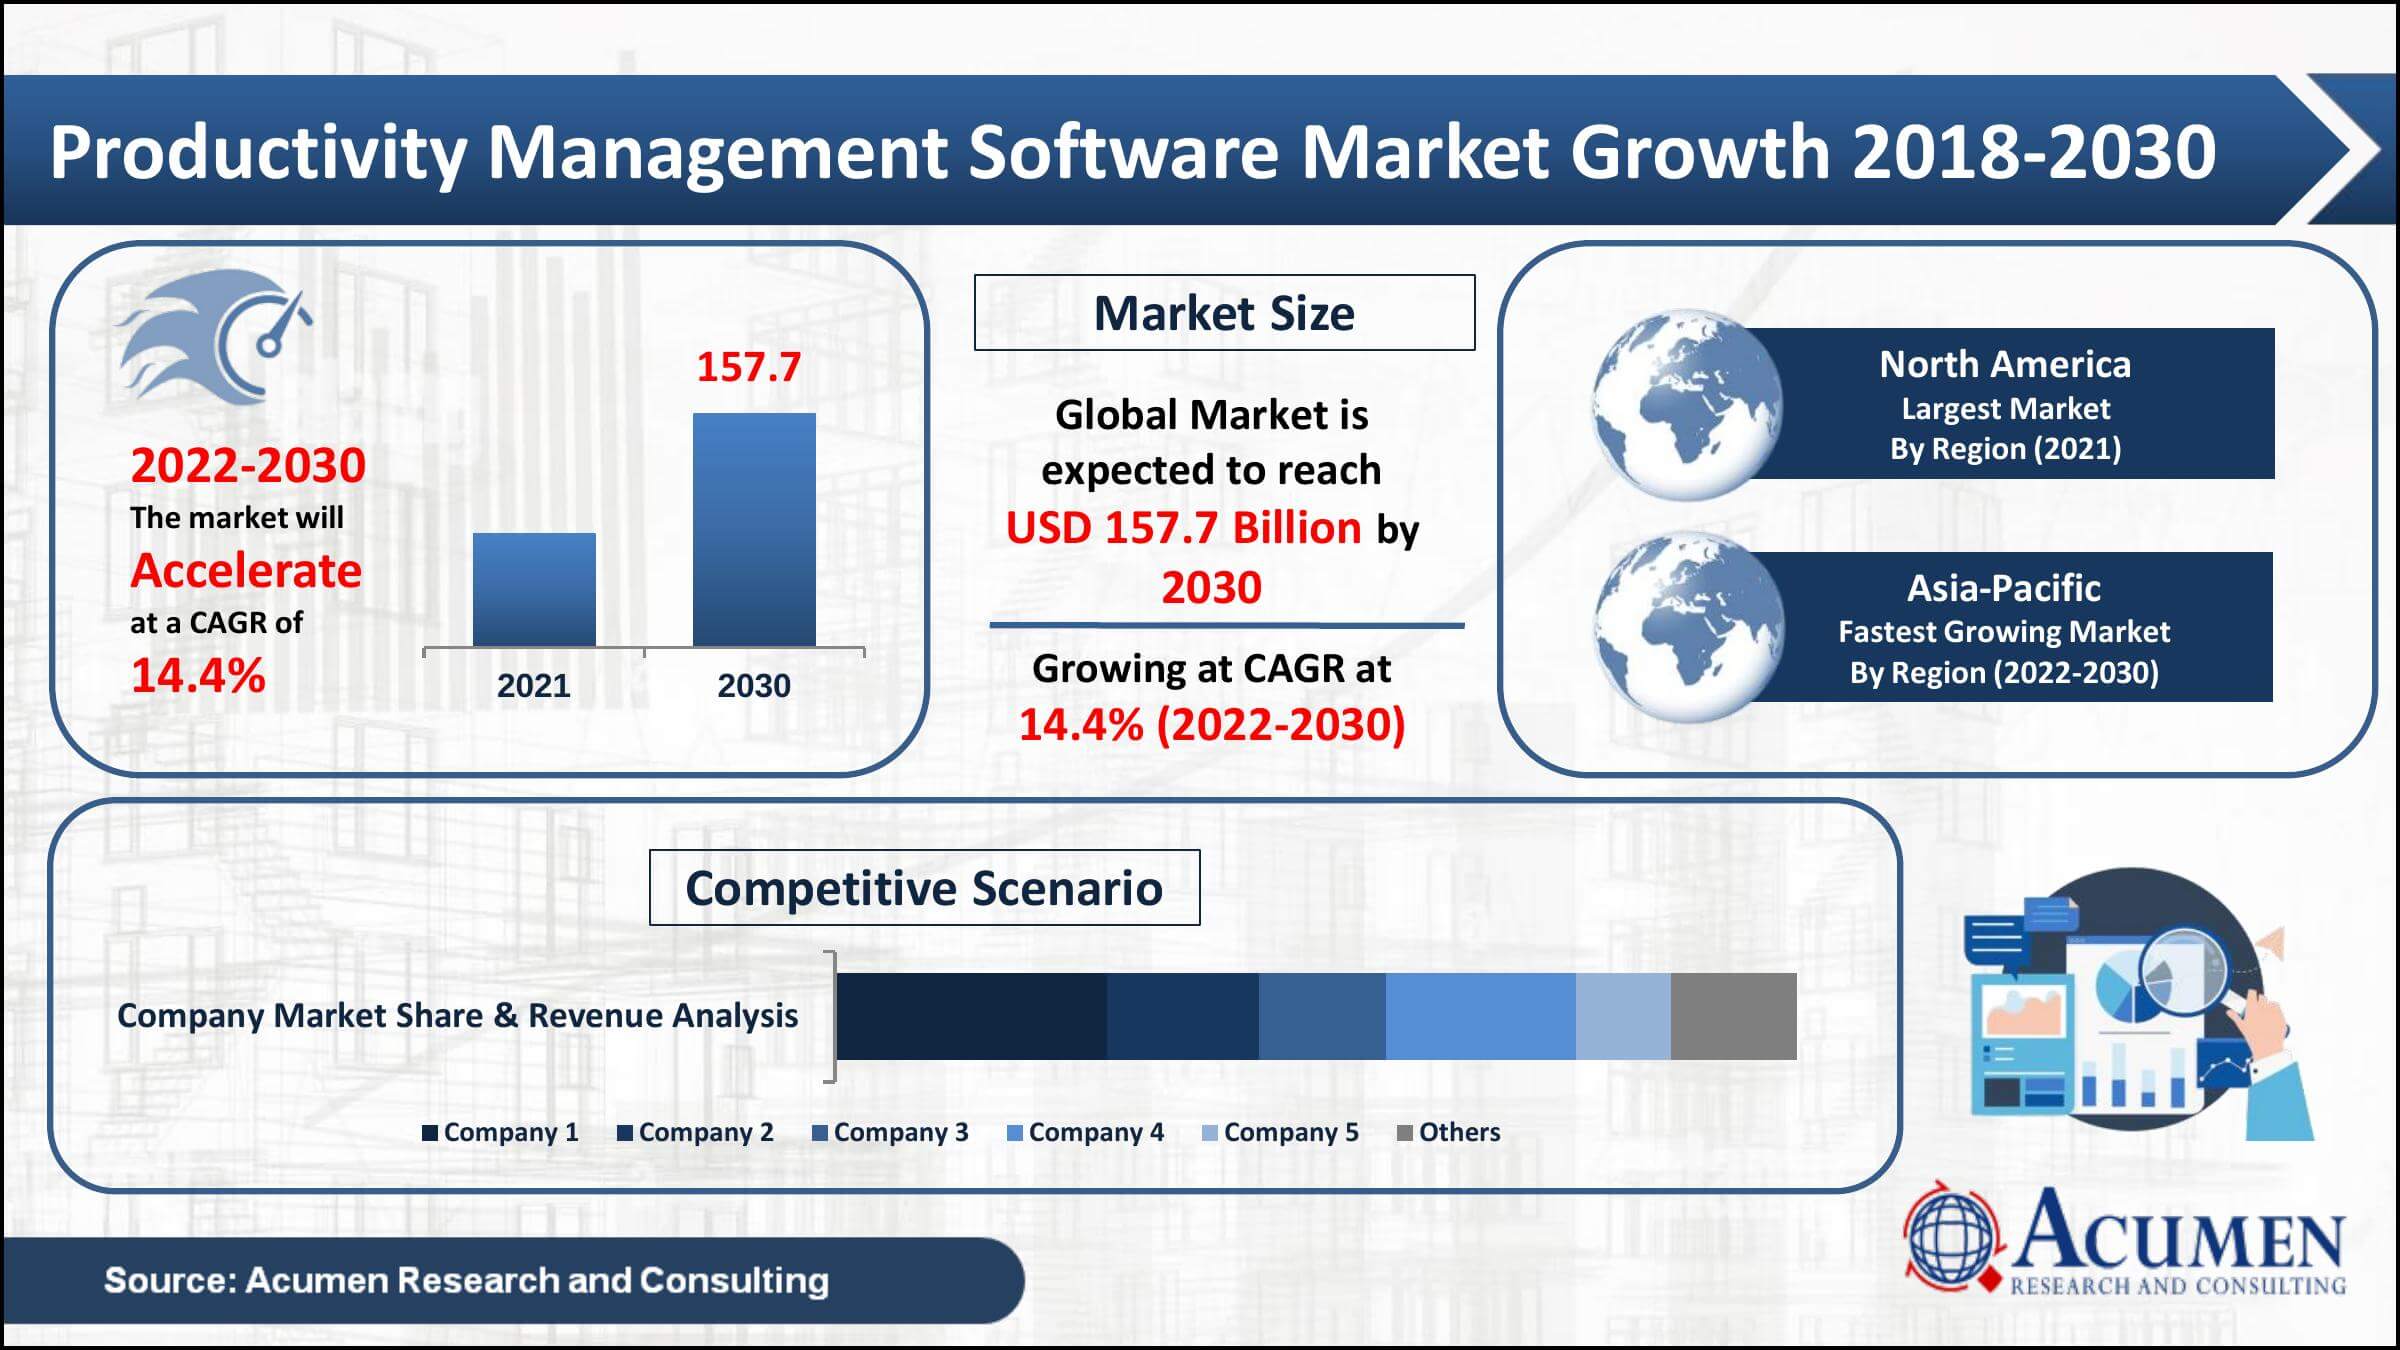 Productivity Management Software Market value to reach USD 157.7 Billion by 2030 at 14.4% CAGR as per Acumen Research and Consulting